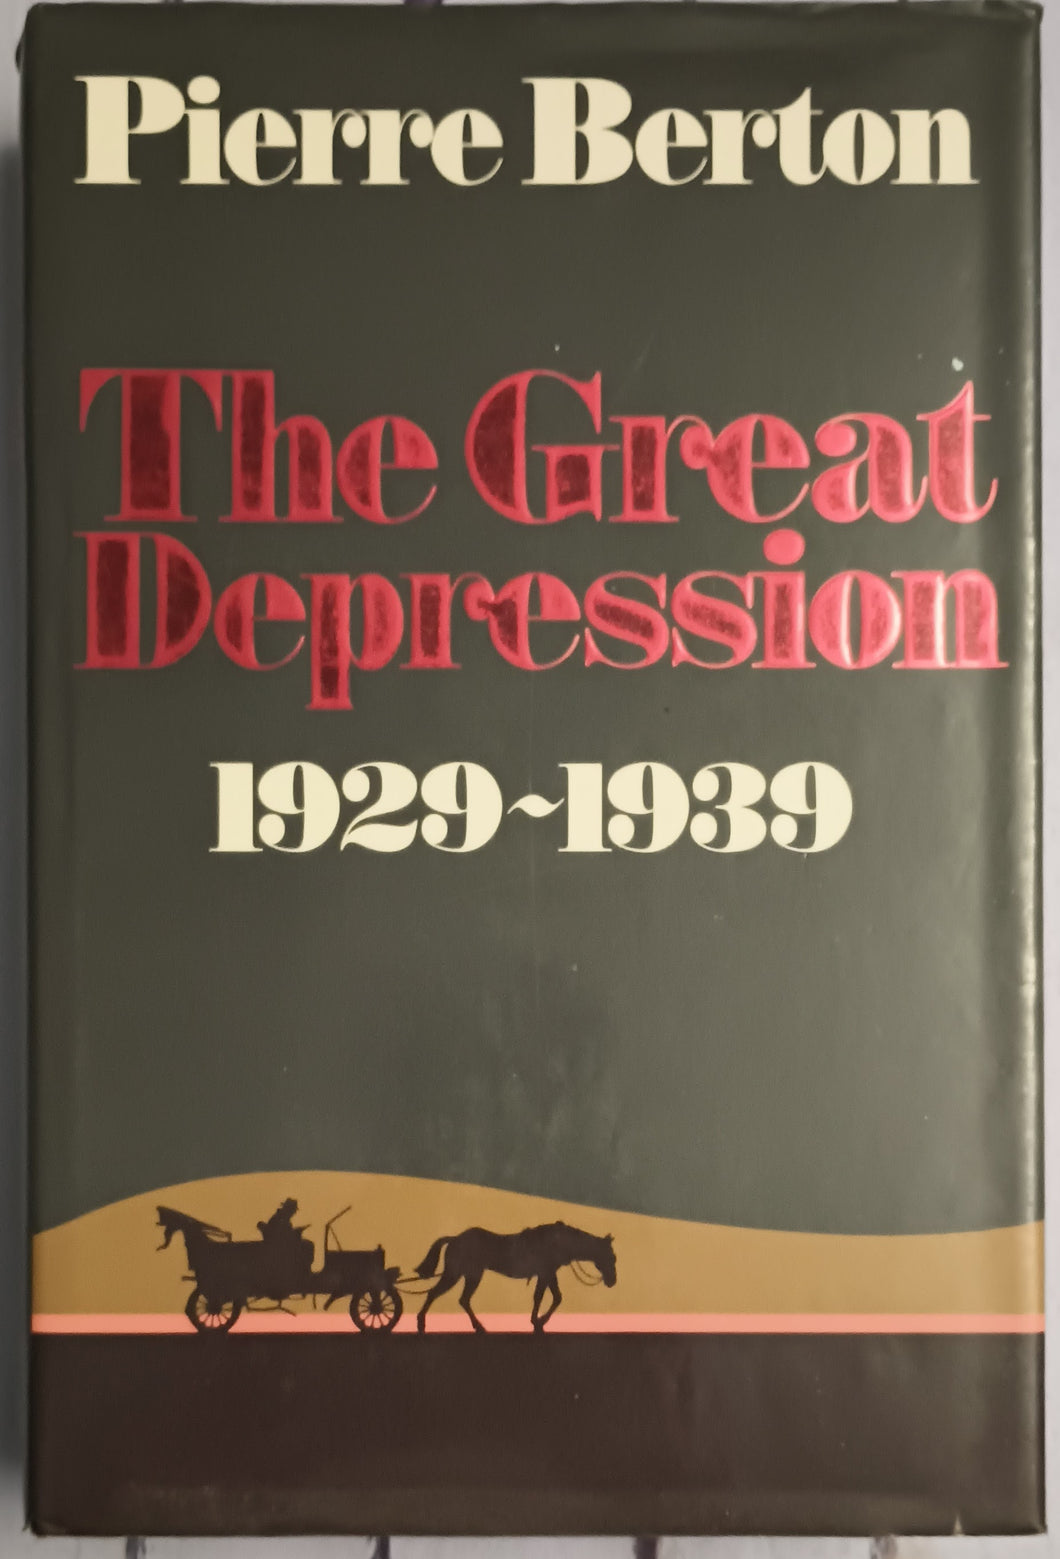 The Great Depression 1929-1239